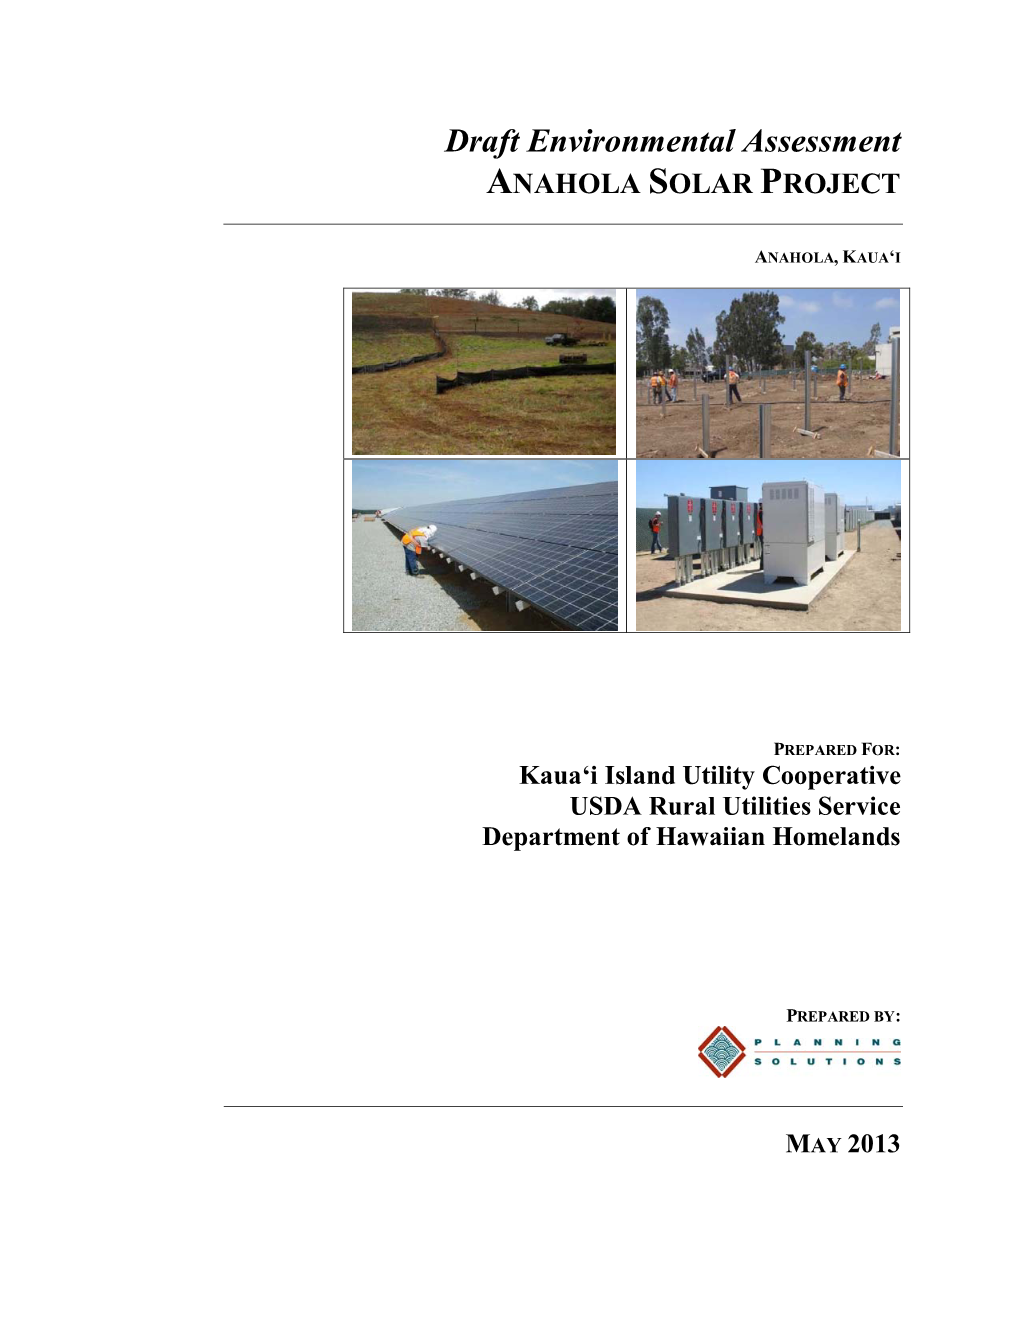 Draft Environmental Assessment ANAHOLA SOLAR PROJECT